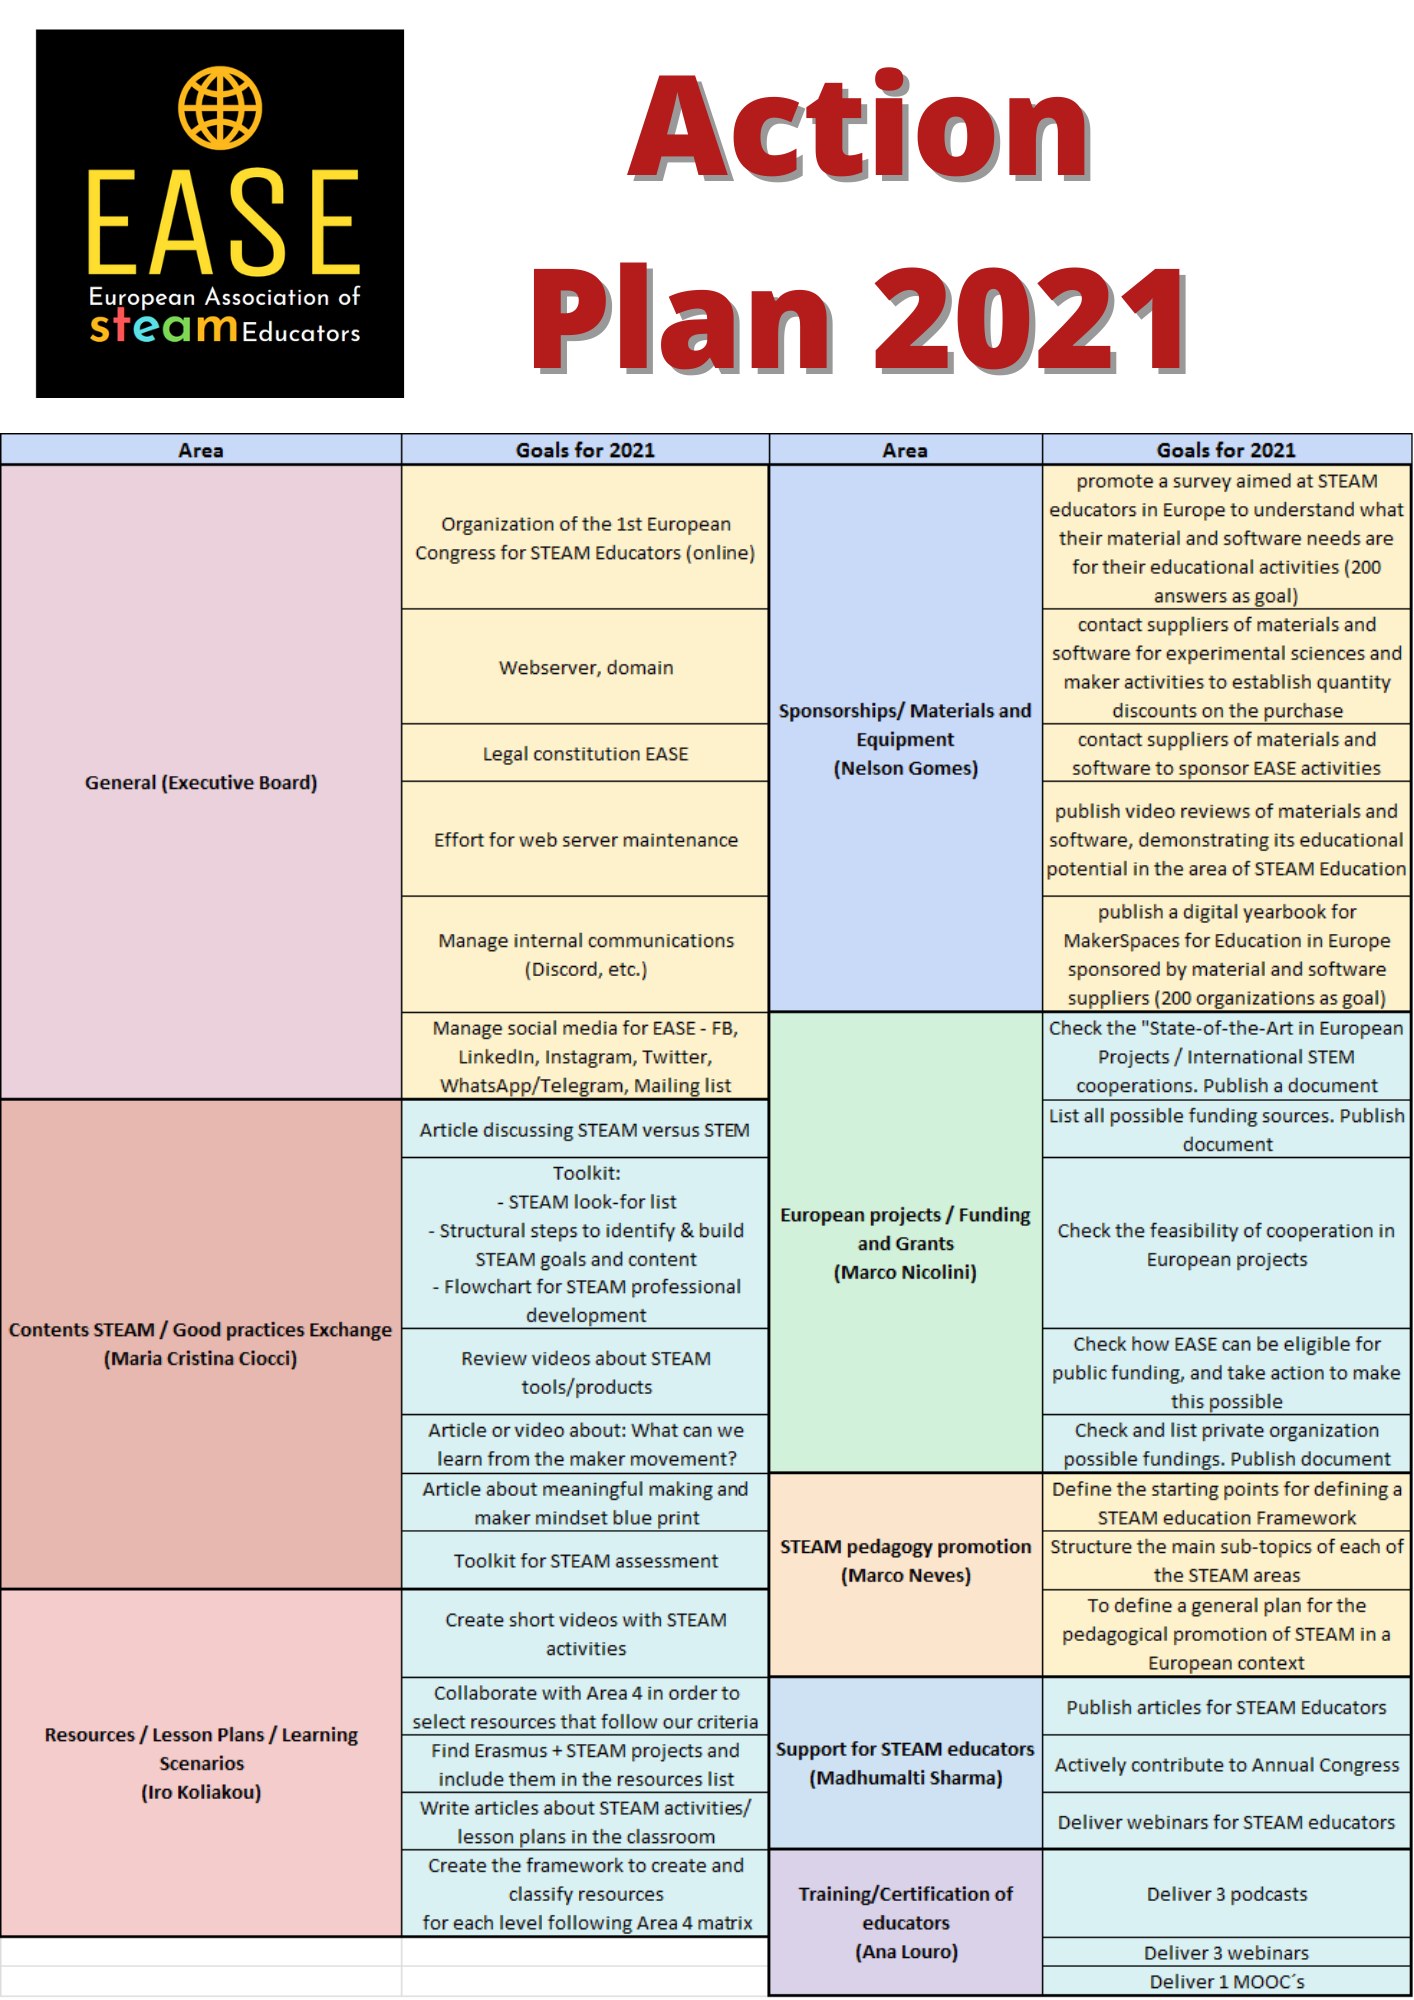 EASE Action Plan 2021